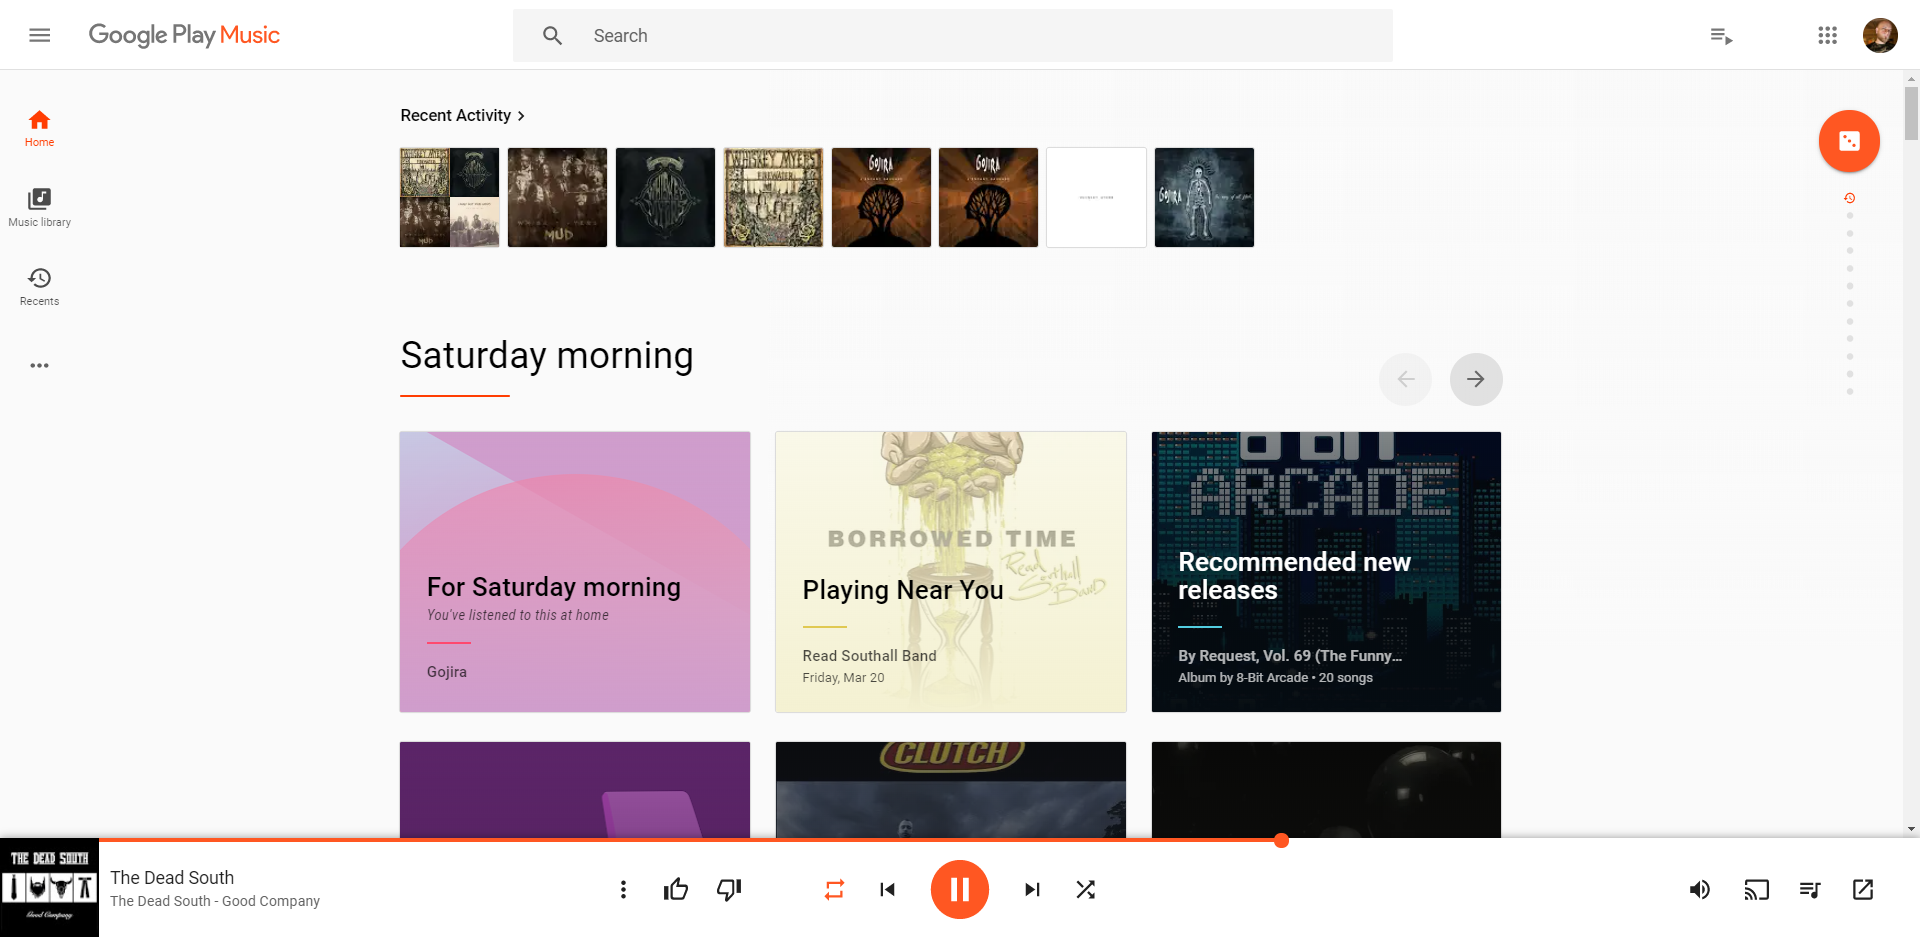 Google Play Music's Home Page